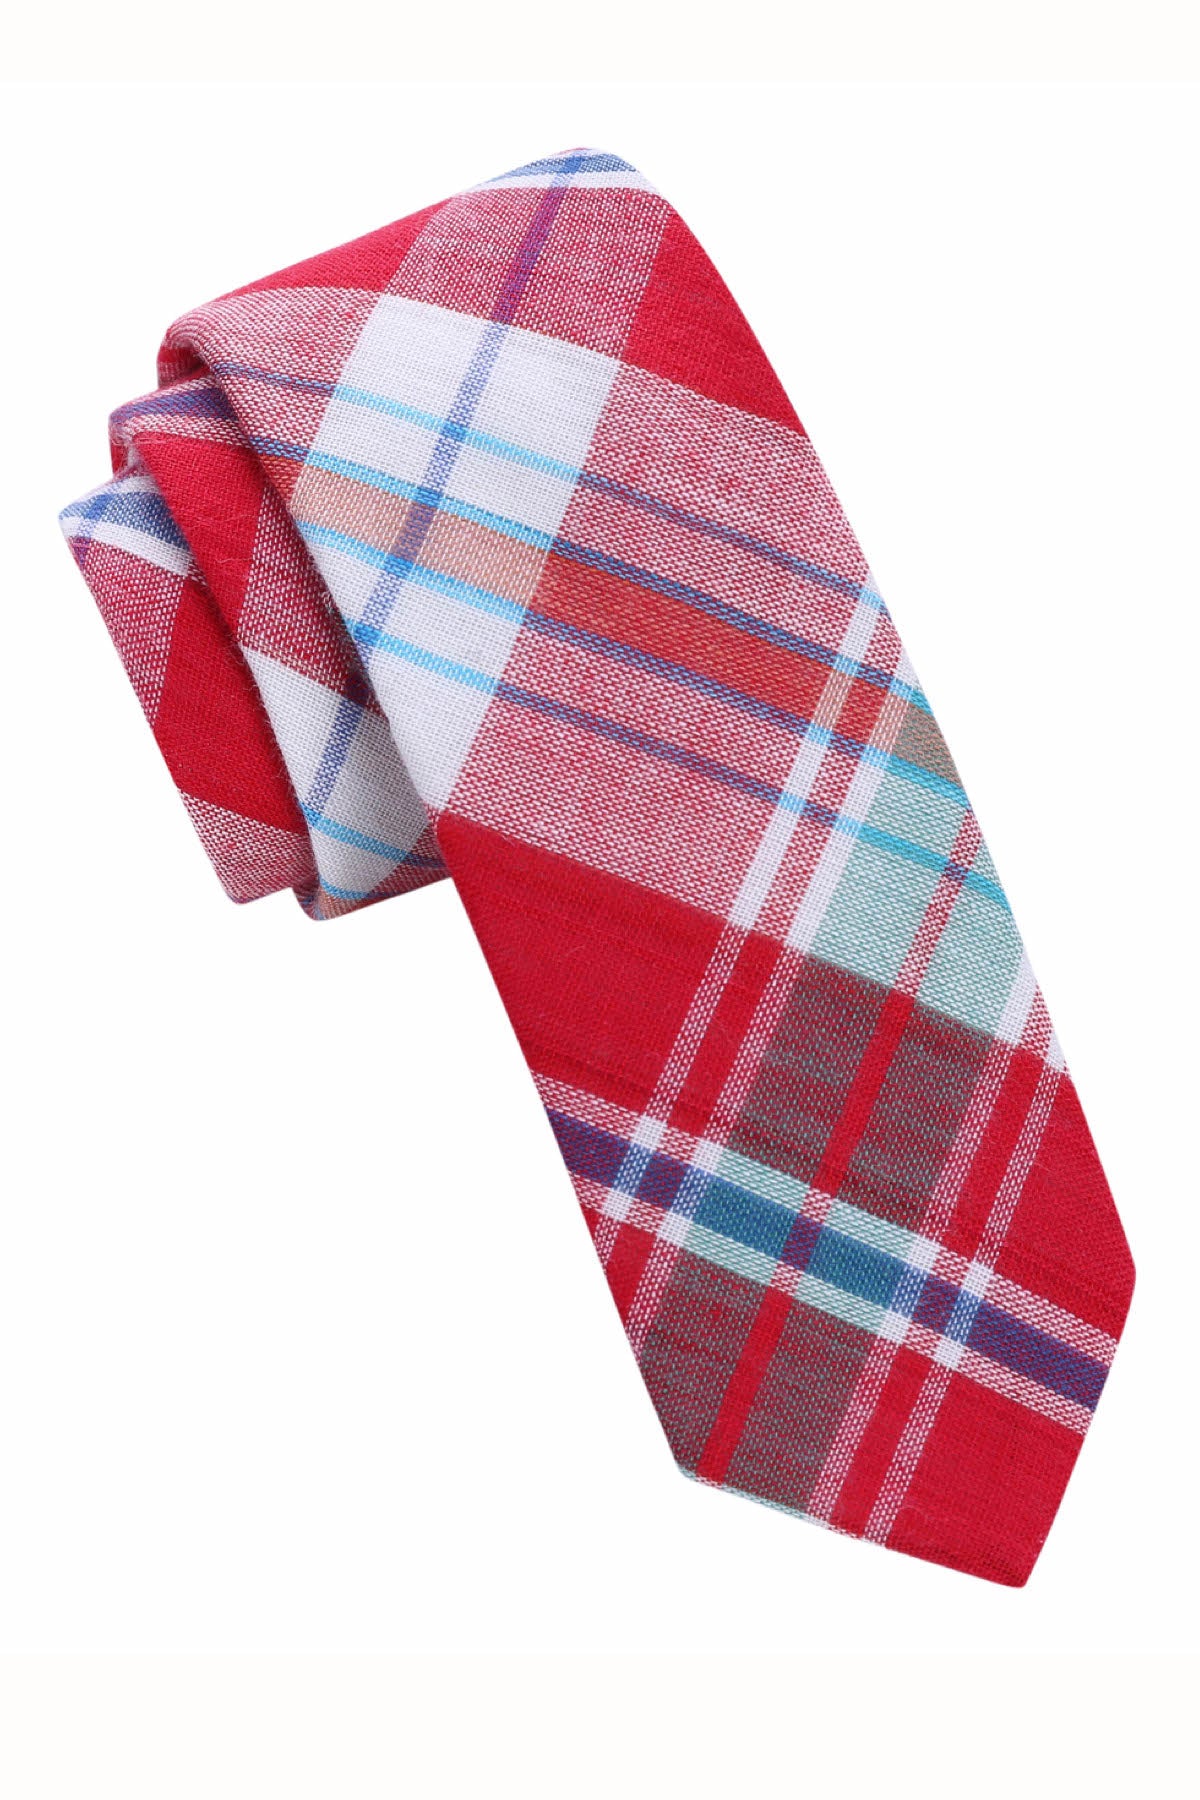 Skinny Tie Madness Red-Multi Old-Fashioned Fondle Tie